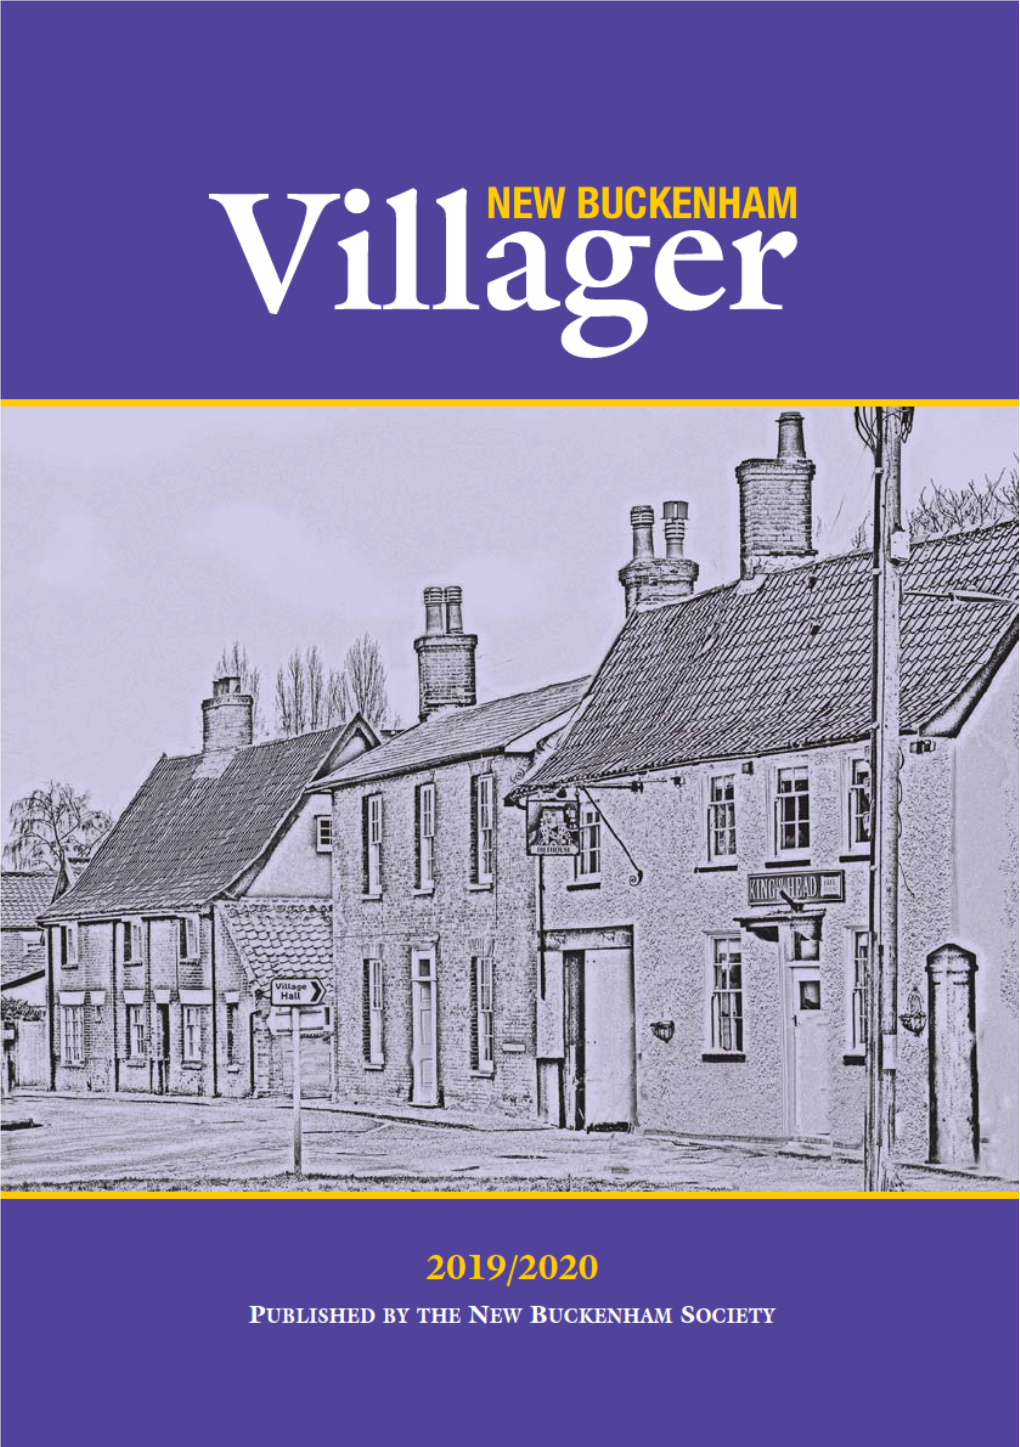 Here You Can Find Current and Past Editions of Parish News Plus an Online Version of This Villager Publication (Minus the Directory, for Privacy Reasons)